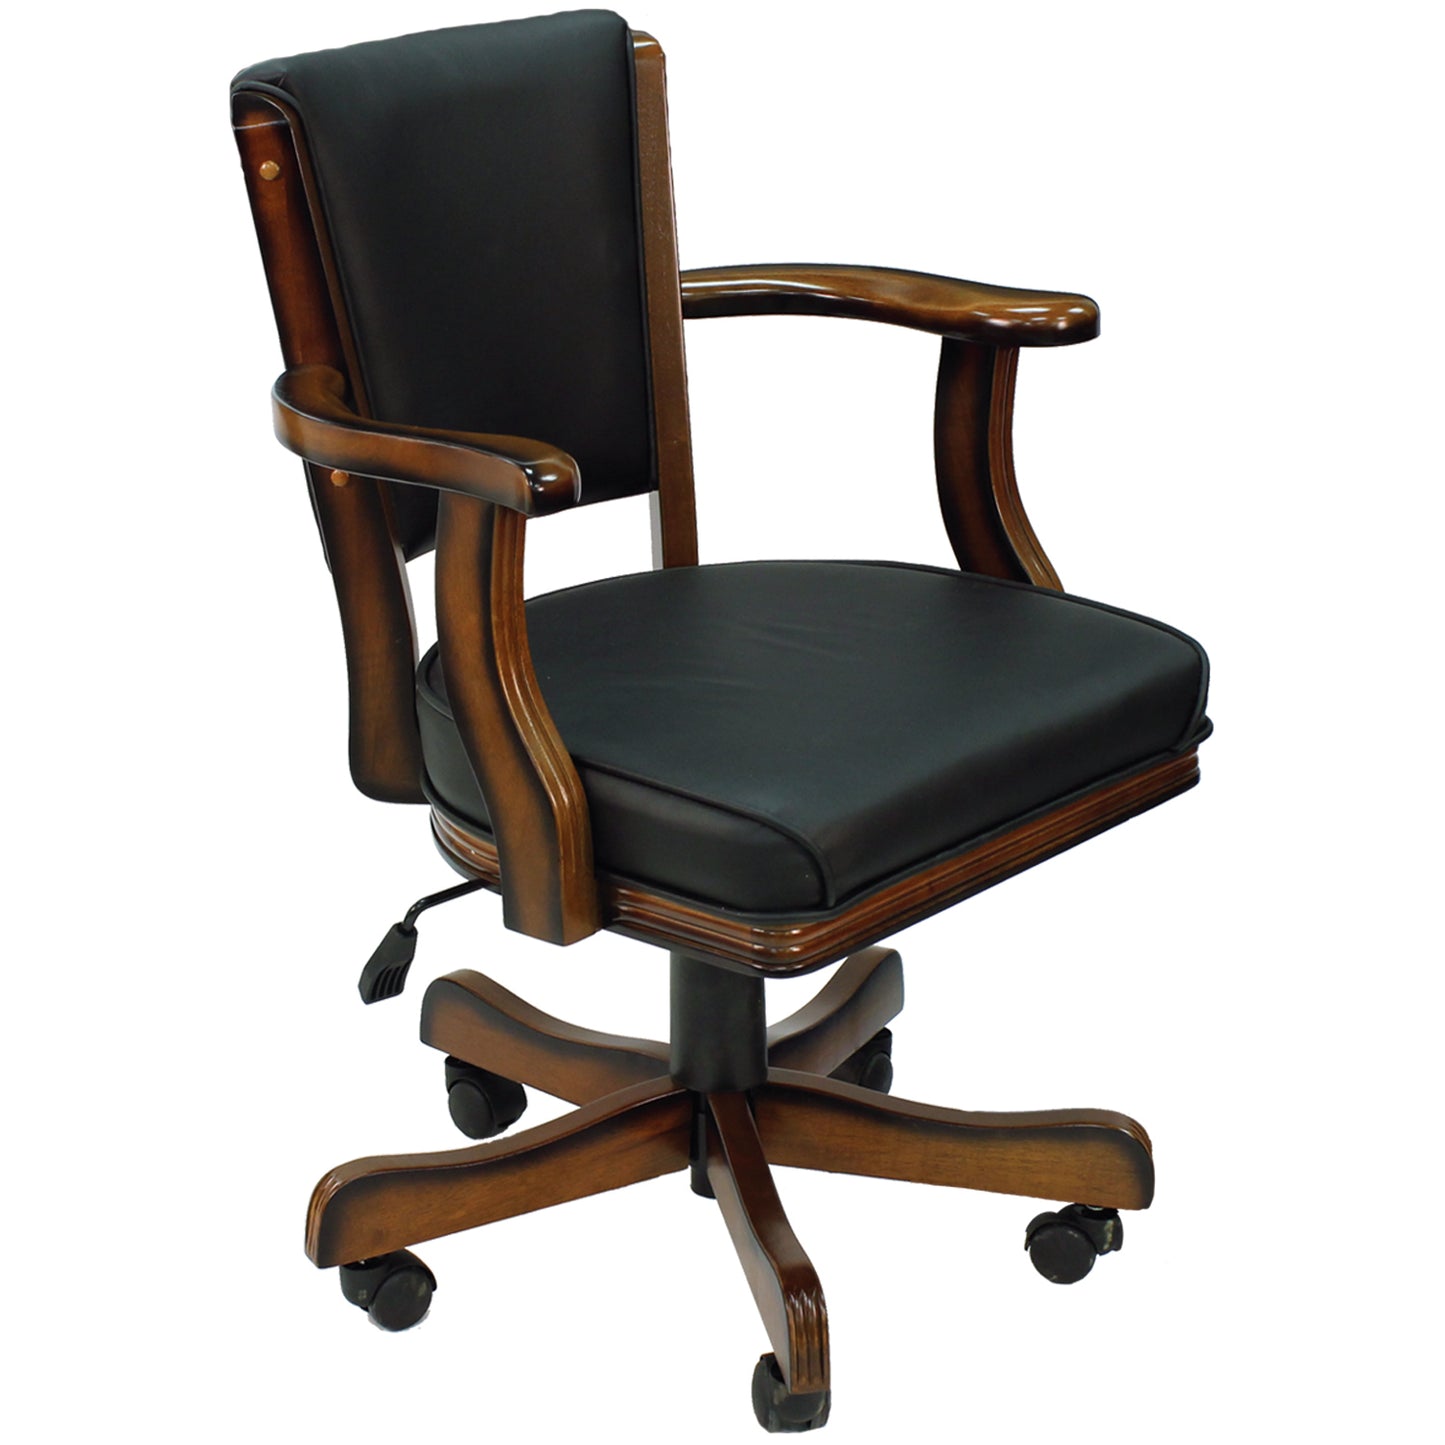 Vinyl padded swivel game chair with arm rests in a chestnut finish.